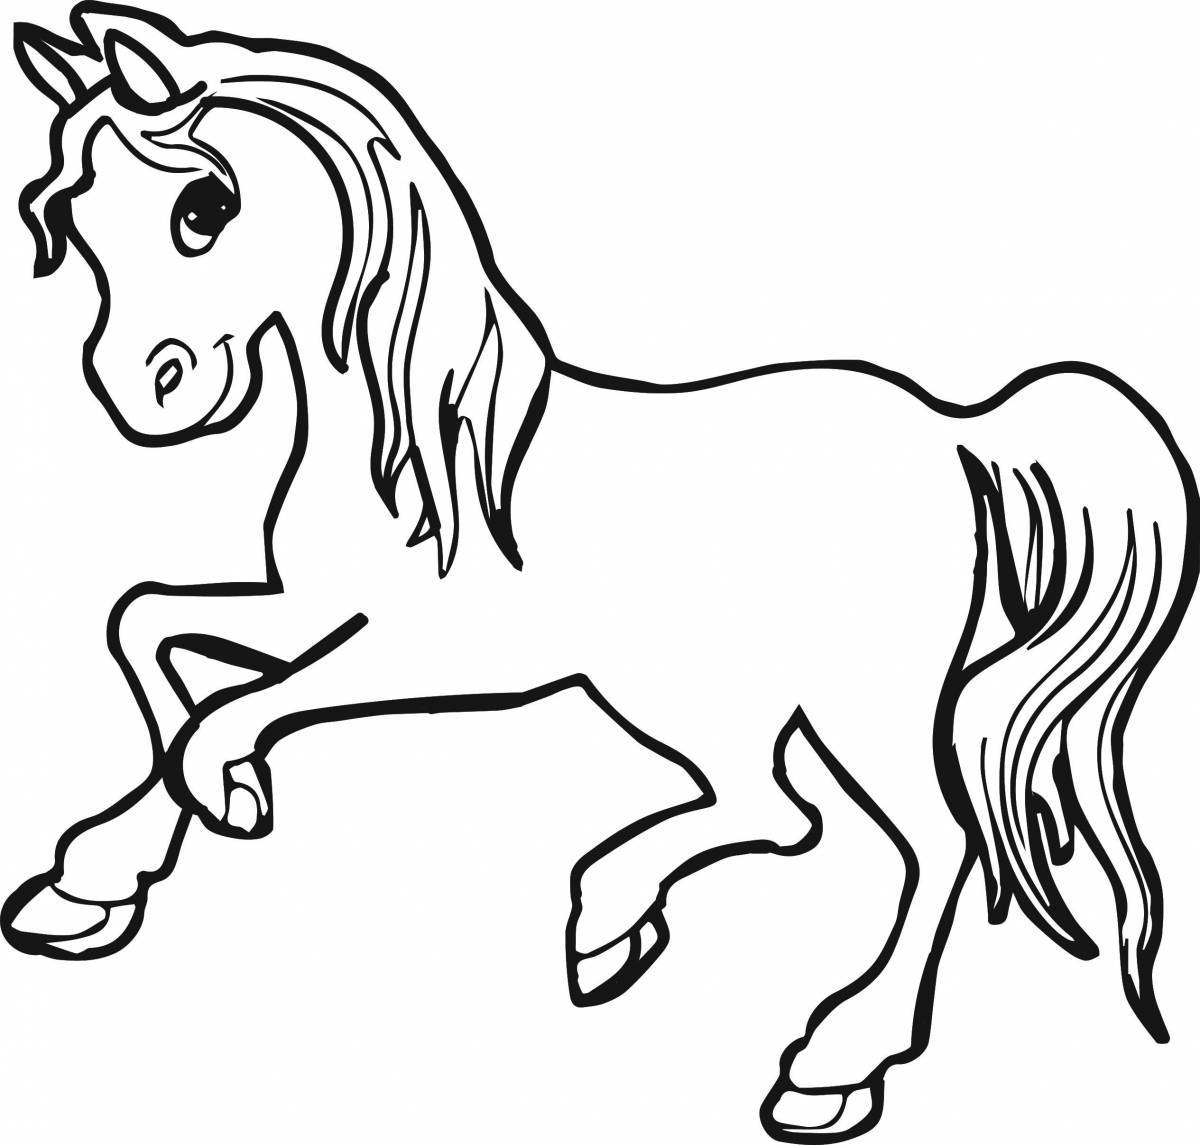 Awesome horse coloring pages for girls